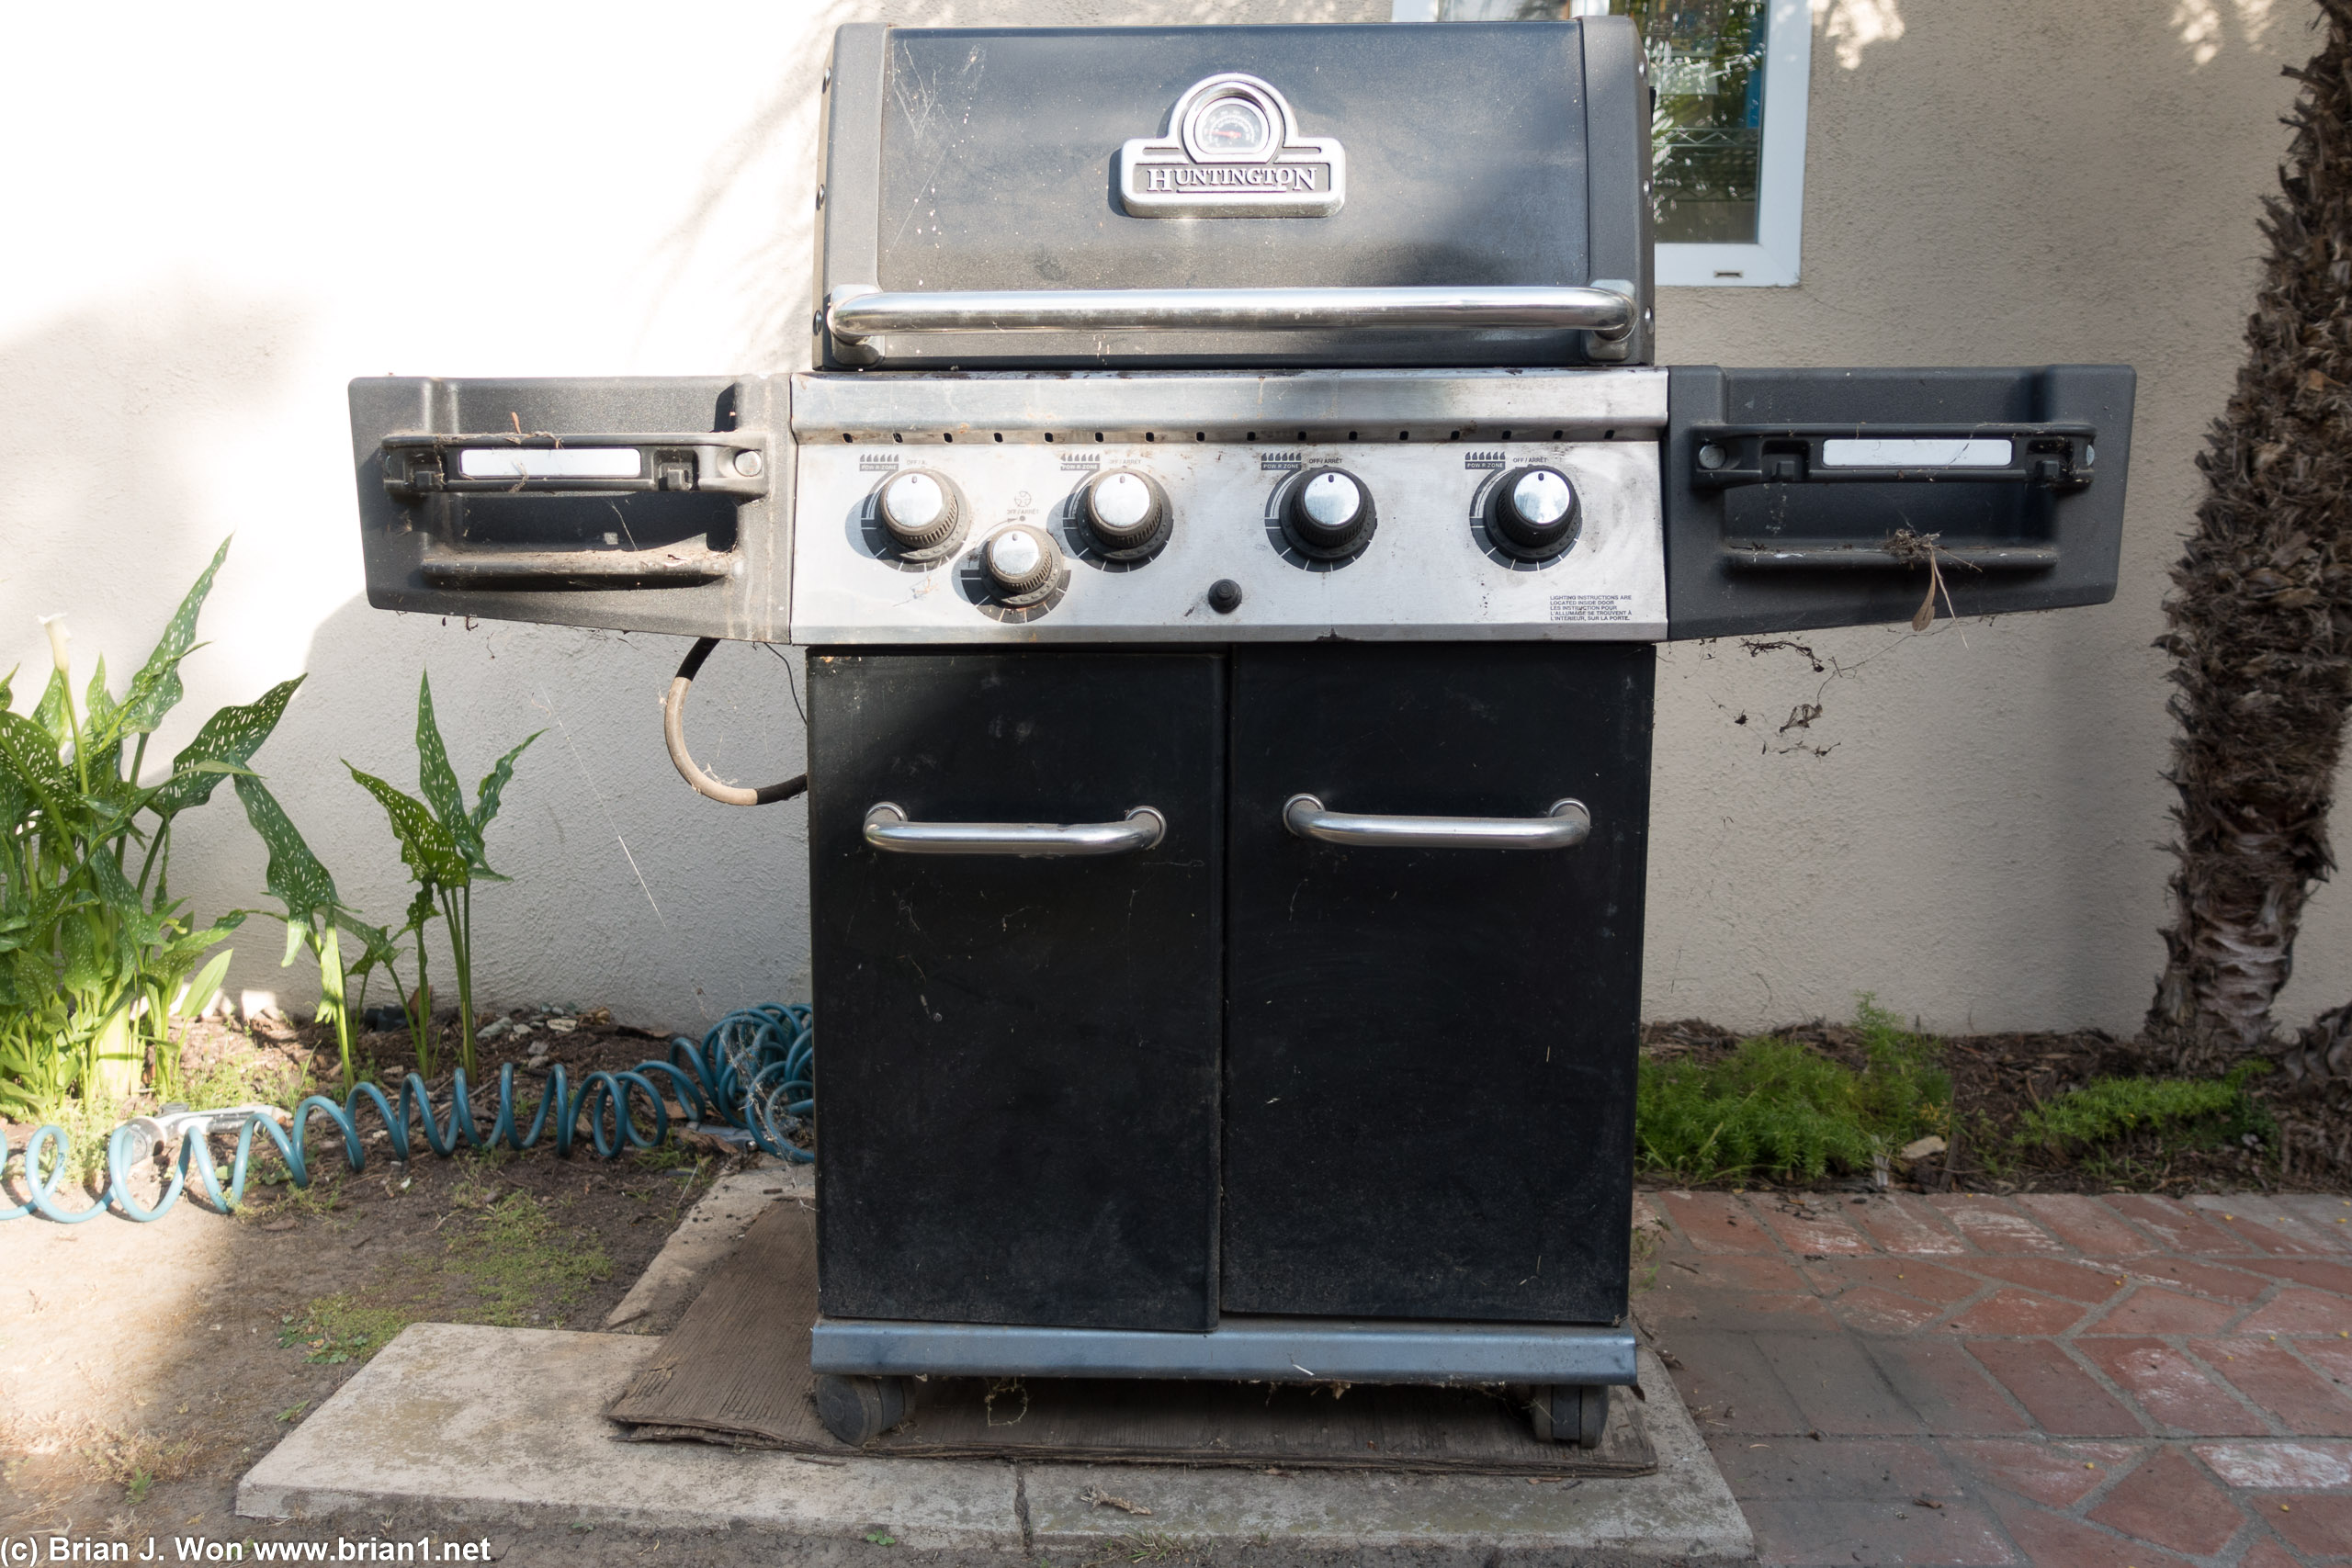 Farewell, old Huntington gas grill. You served well.